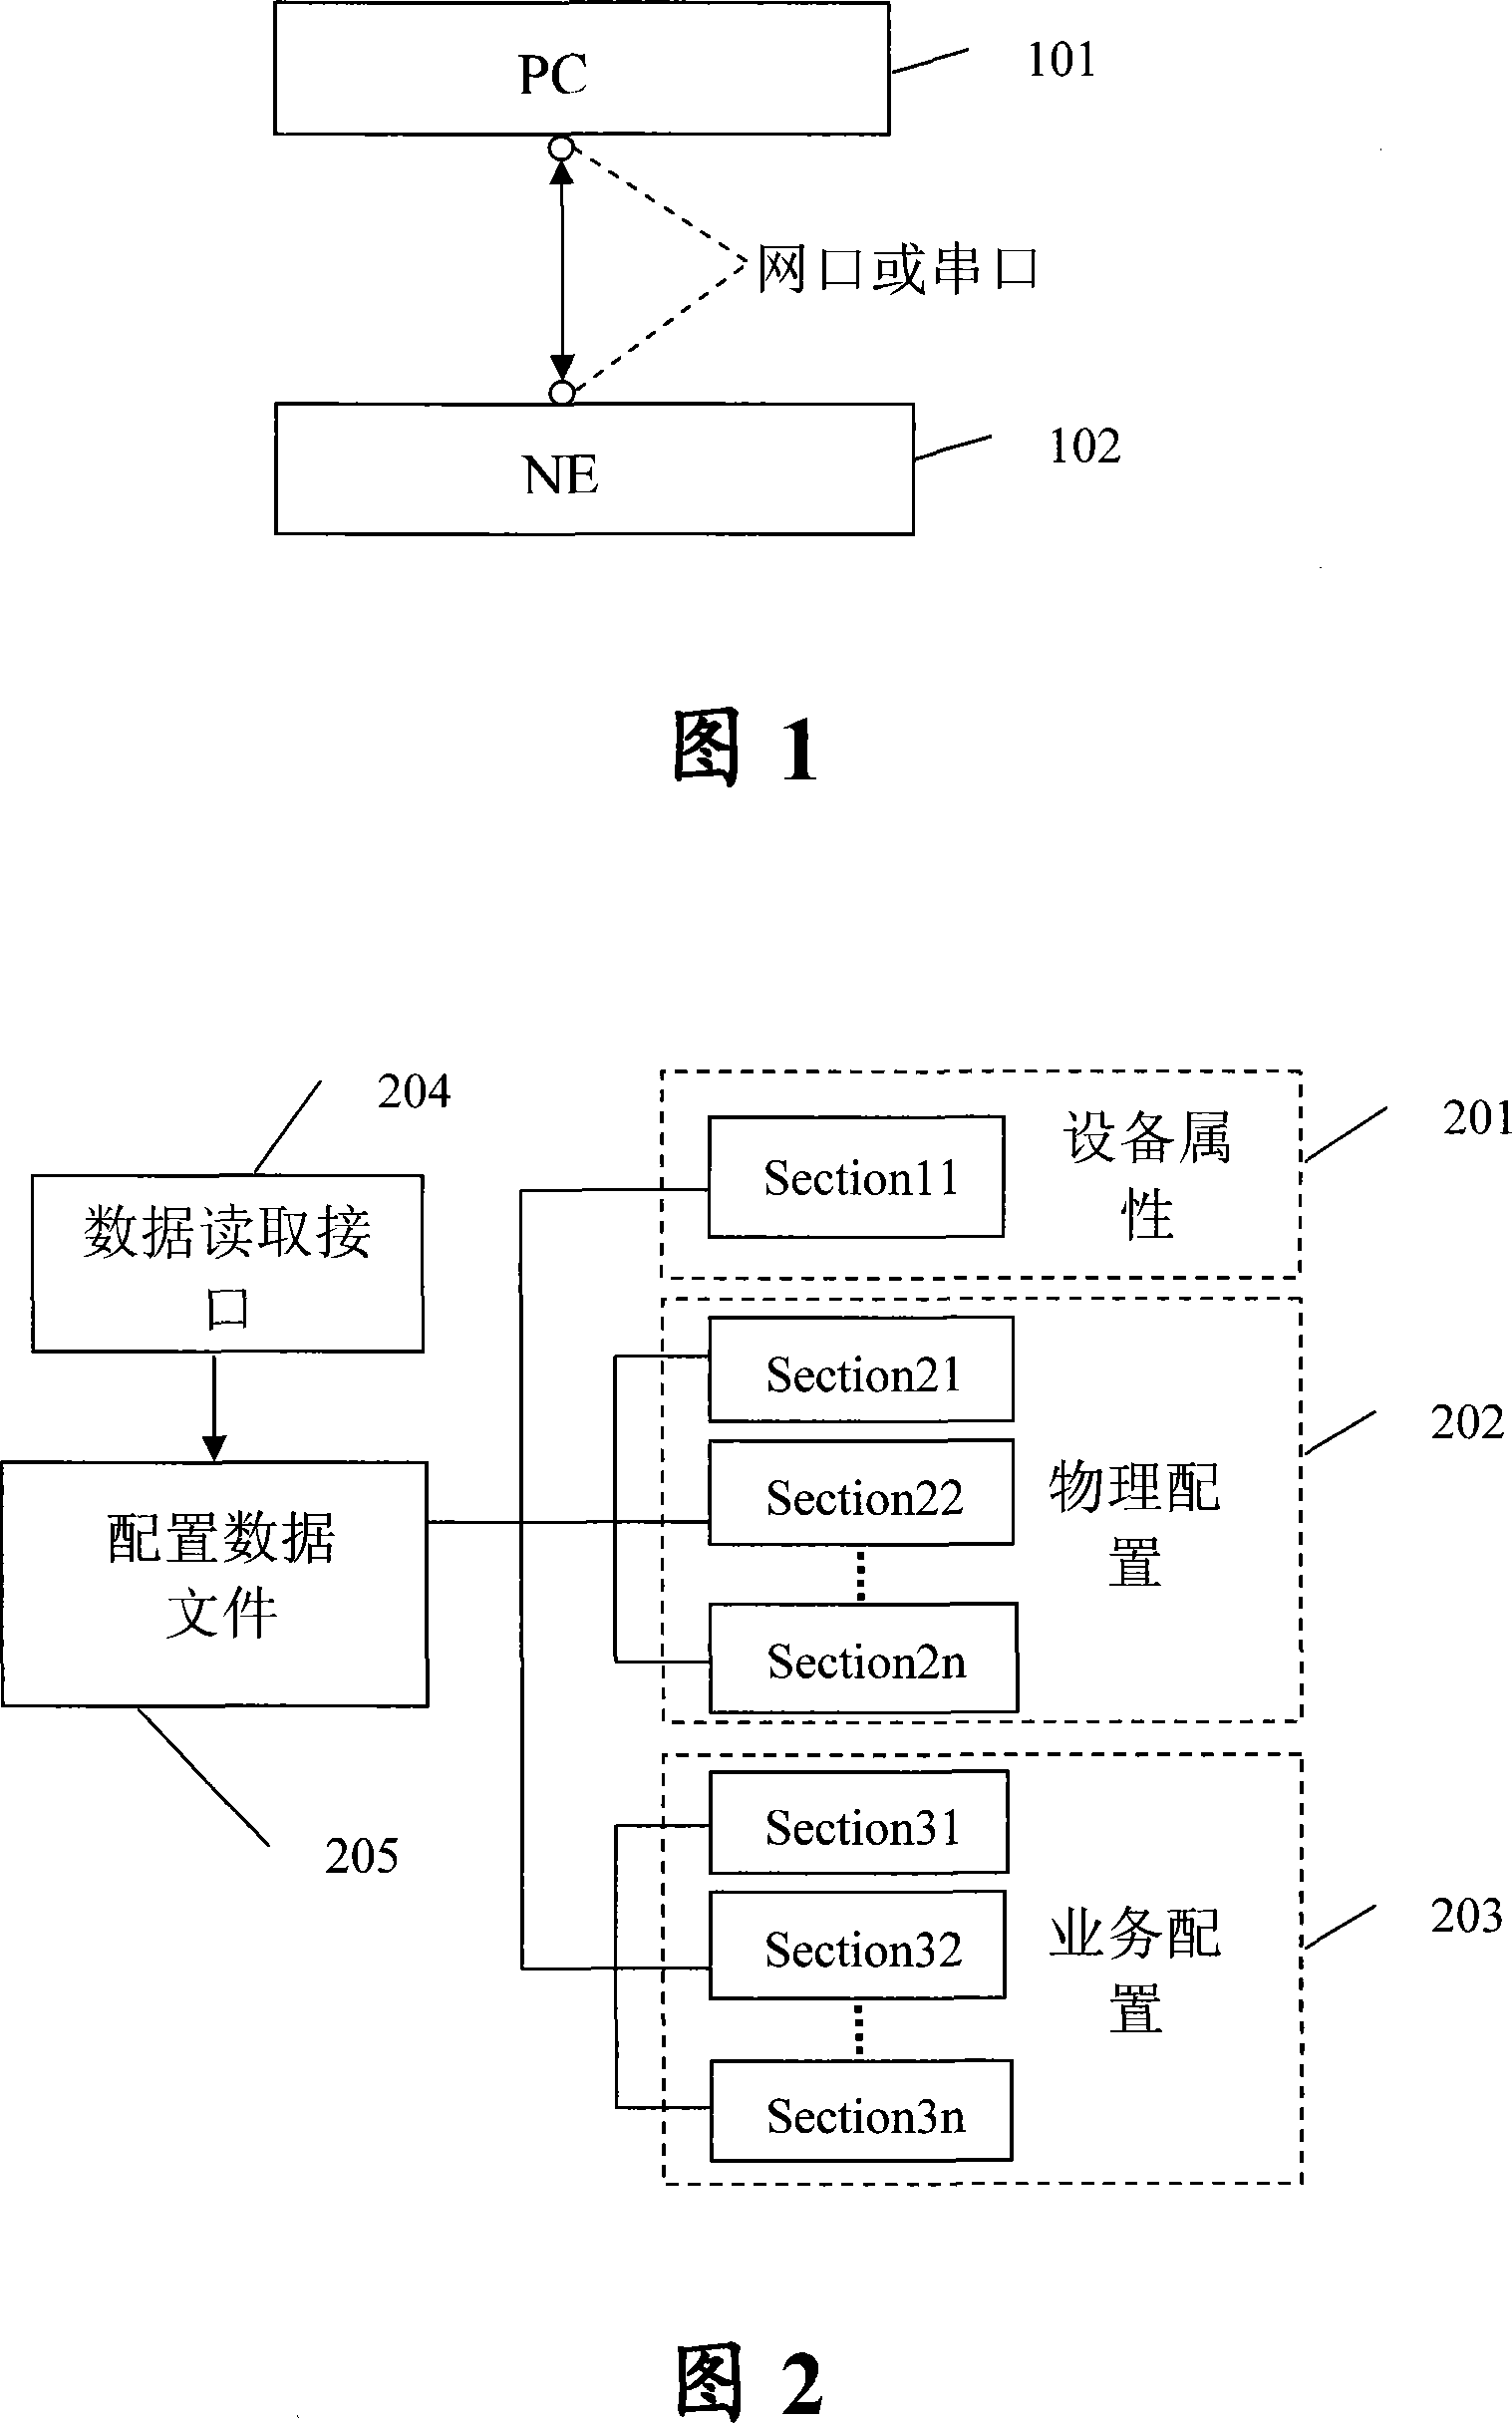 A method for implementing automatic configuration of integrated access device